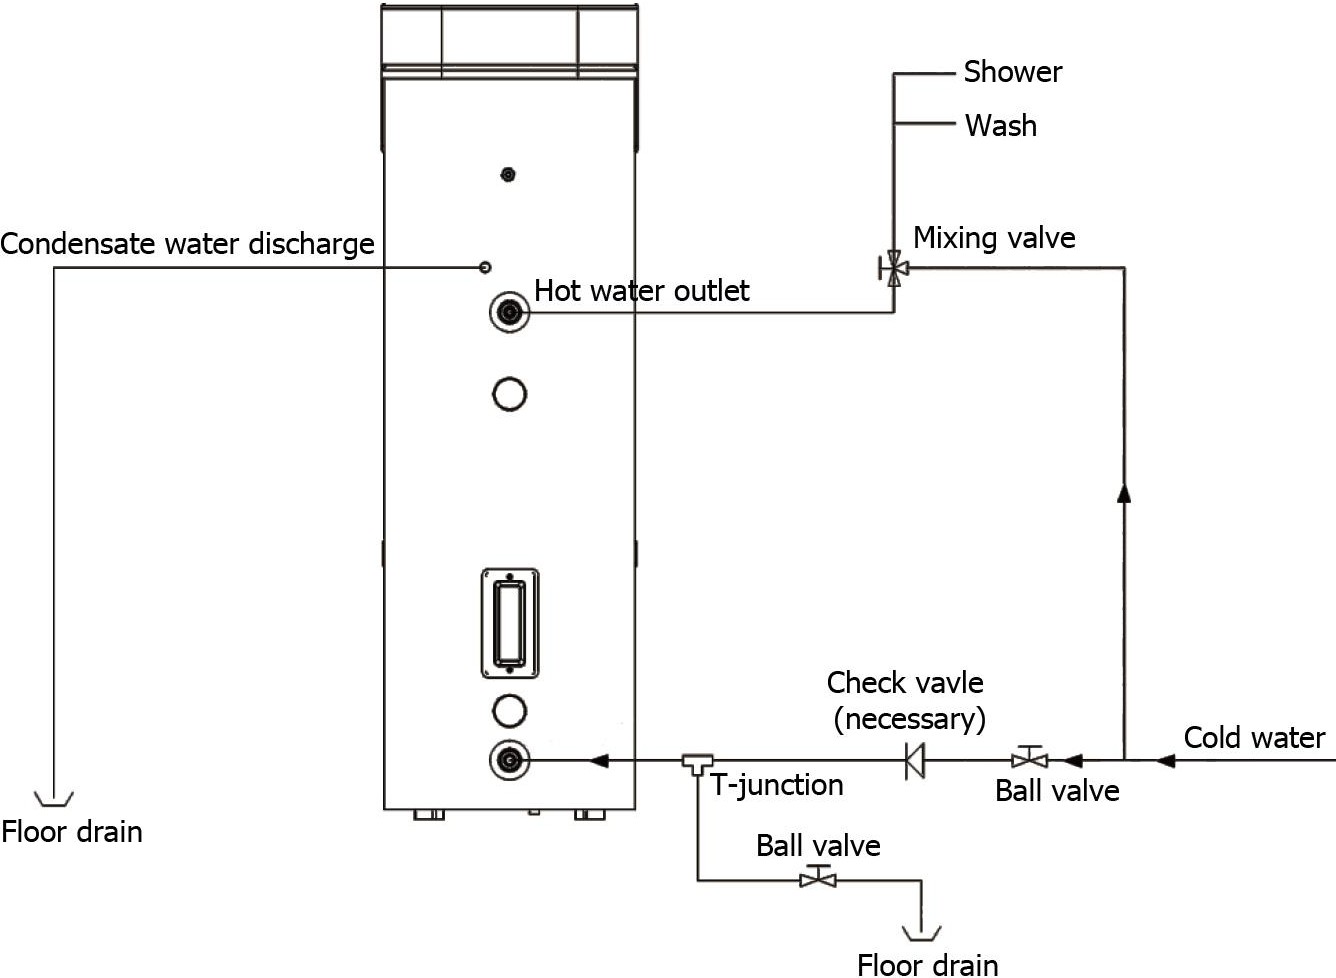 Installation and connection diagram of water heater